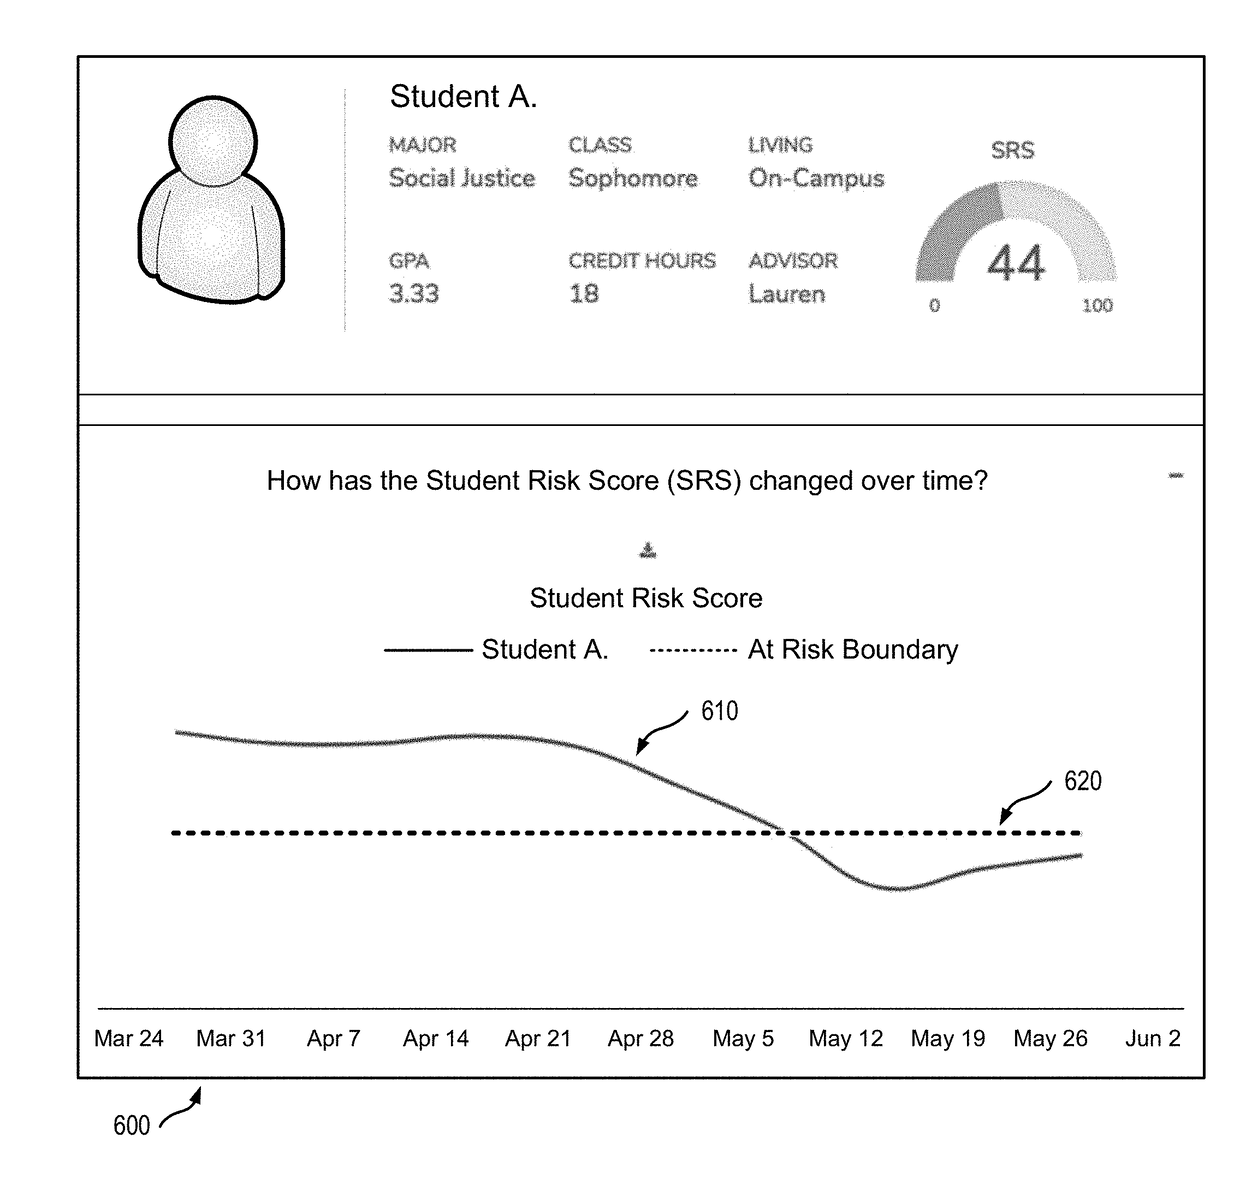 Student engagement and analytics systems and methods with machine learning student behaviors based on objective measures of student engagement